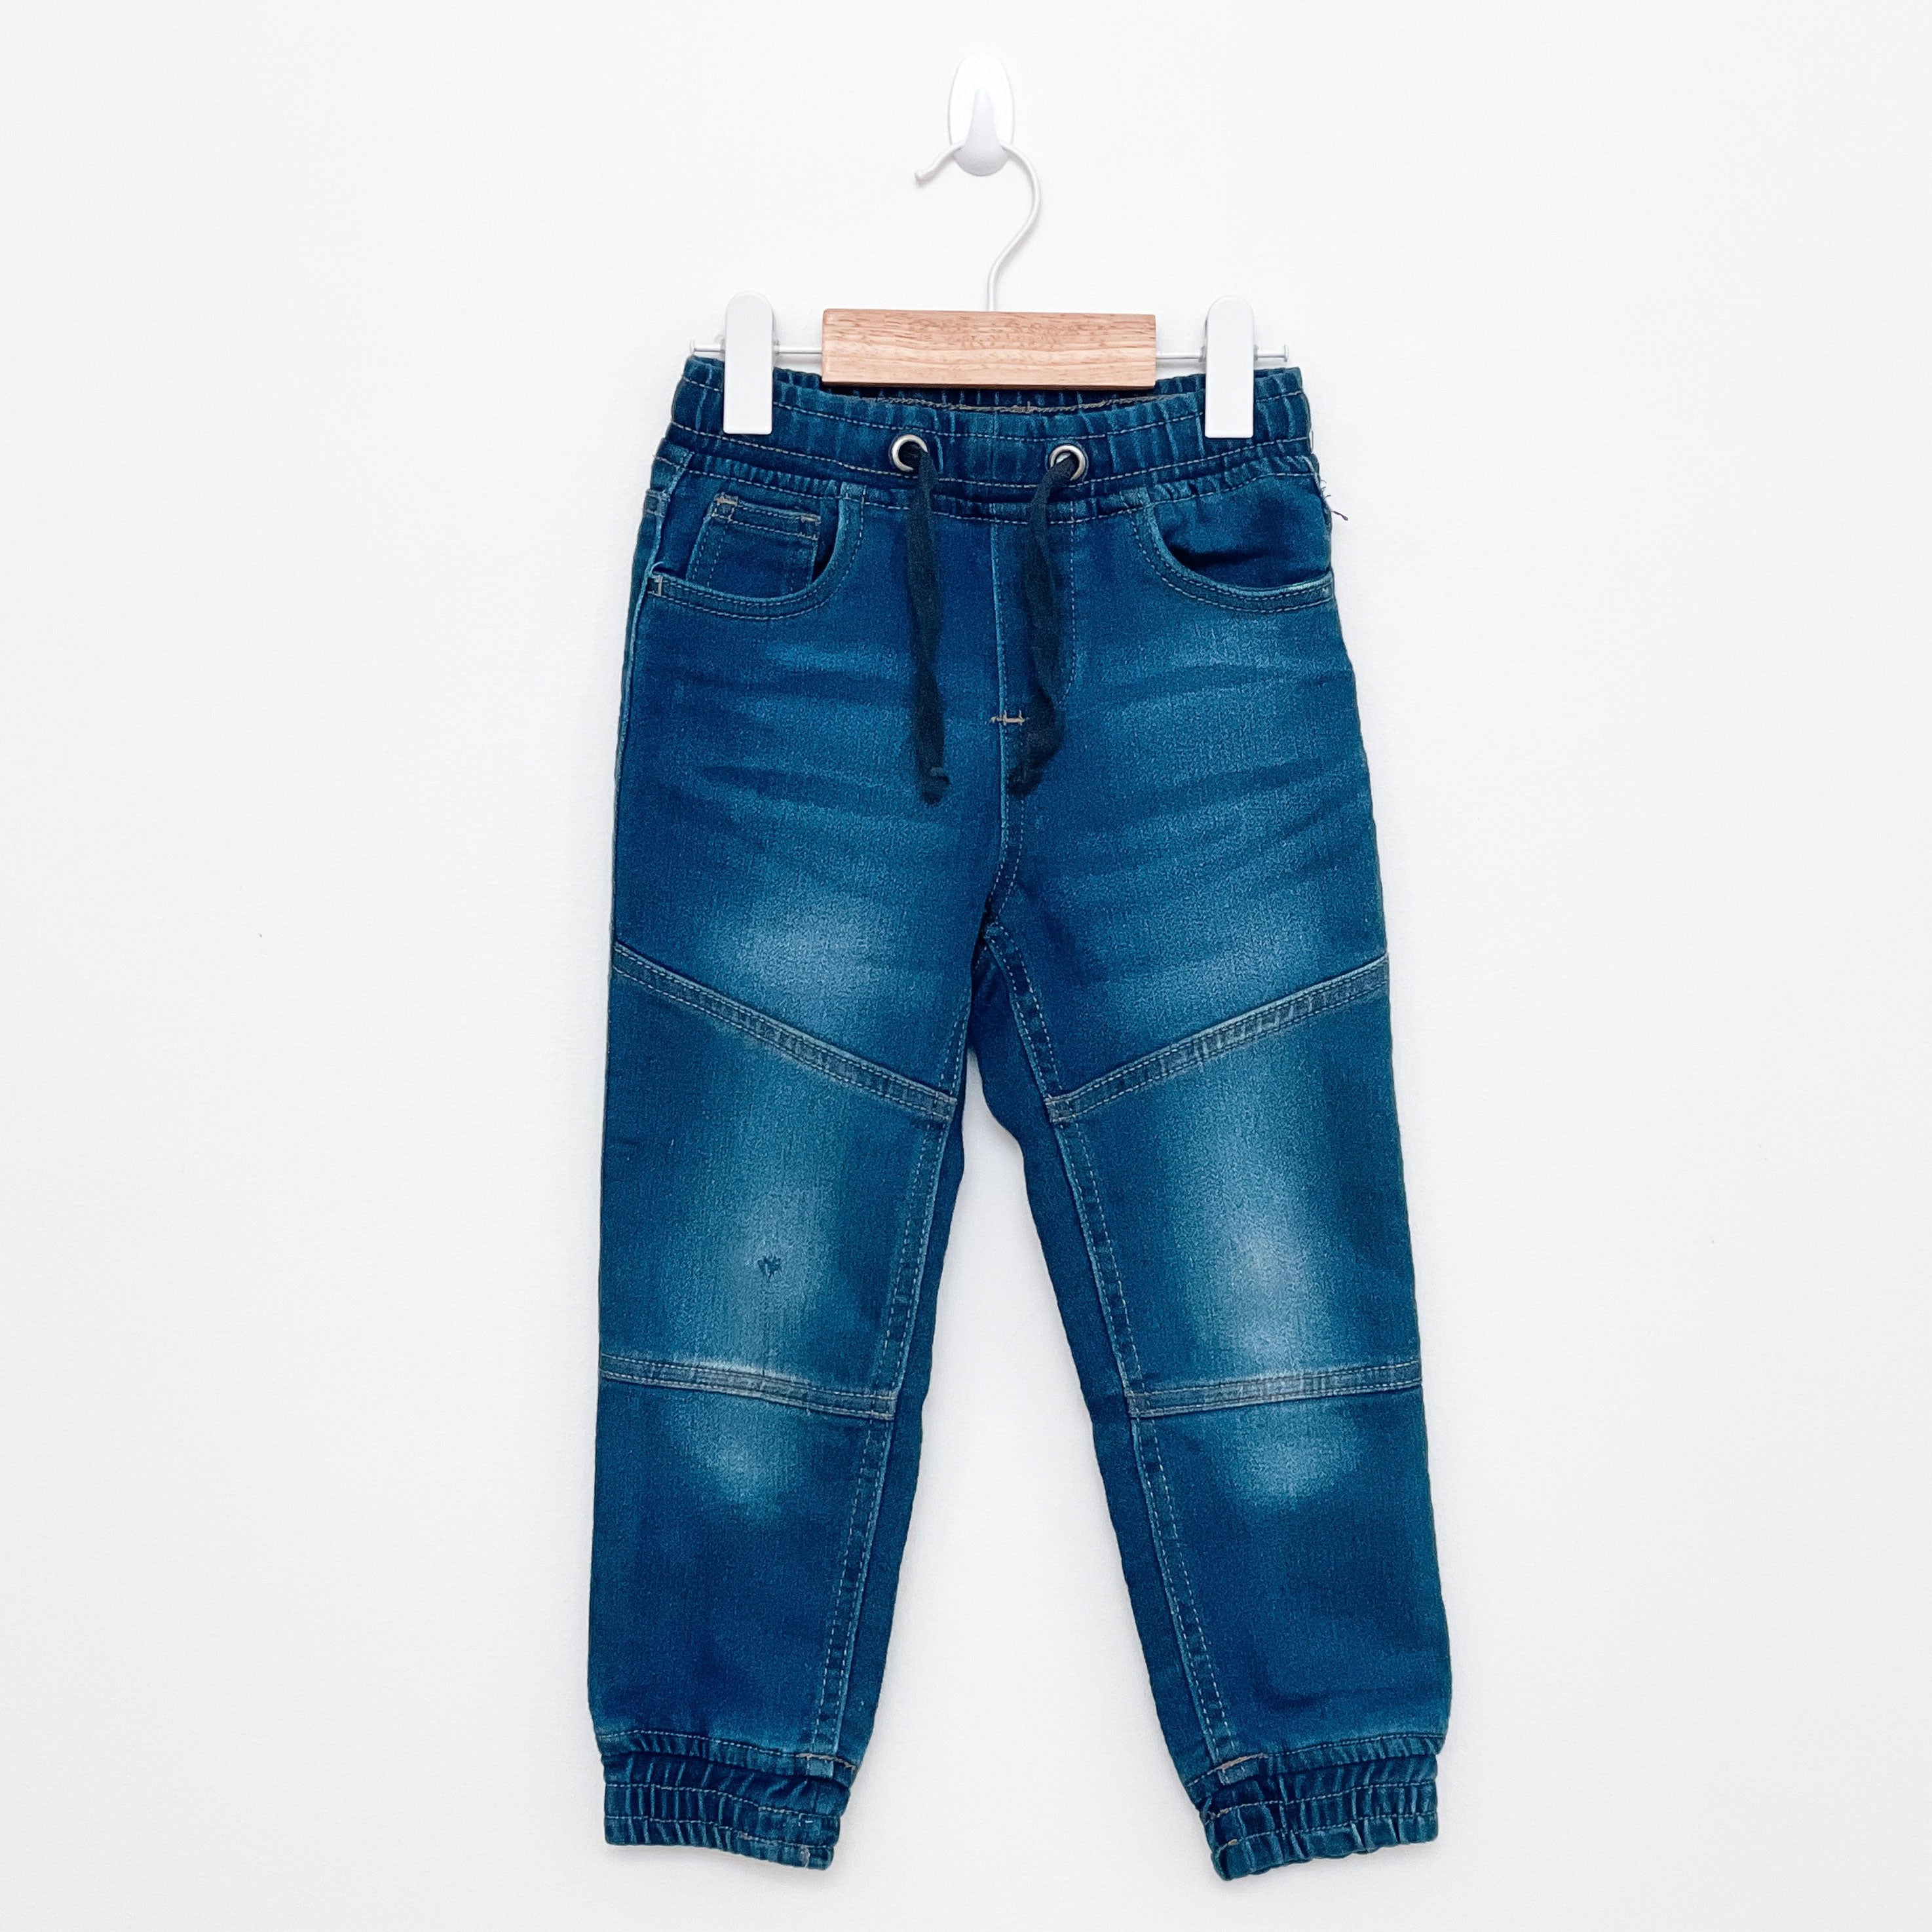 Rewear – The Toddler jeans (98) Company